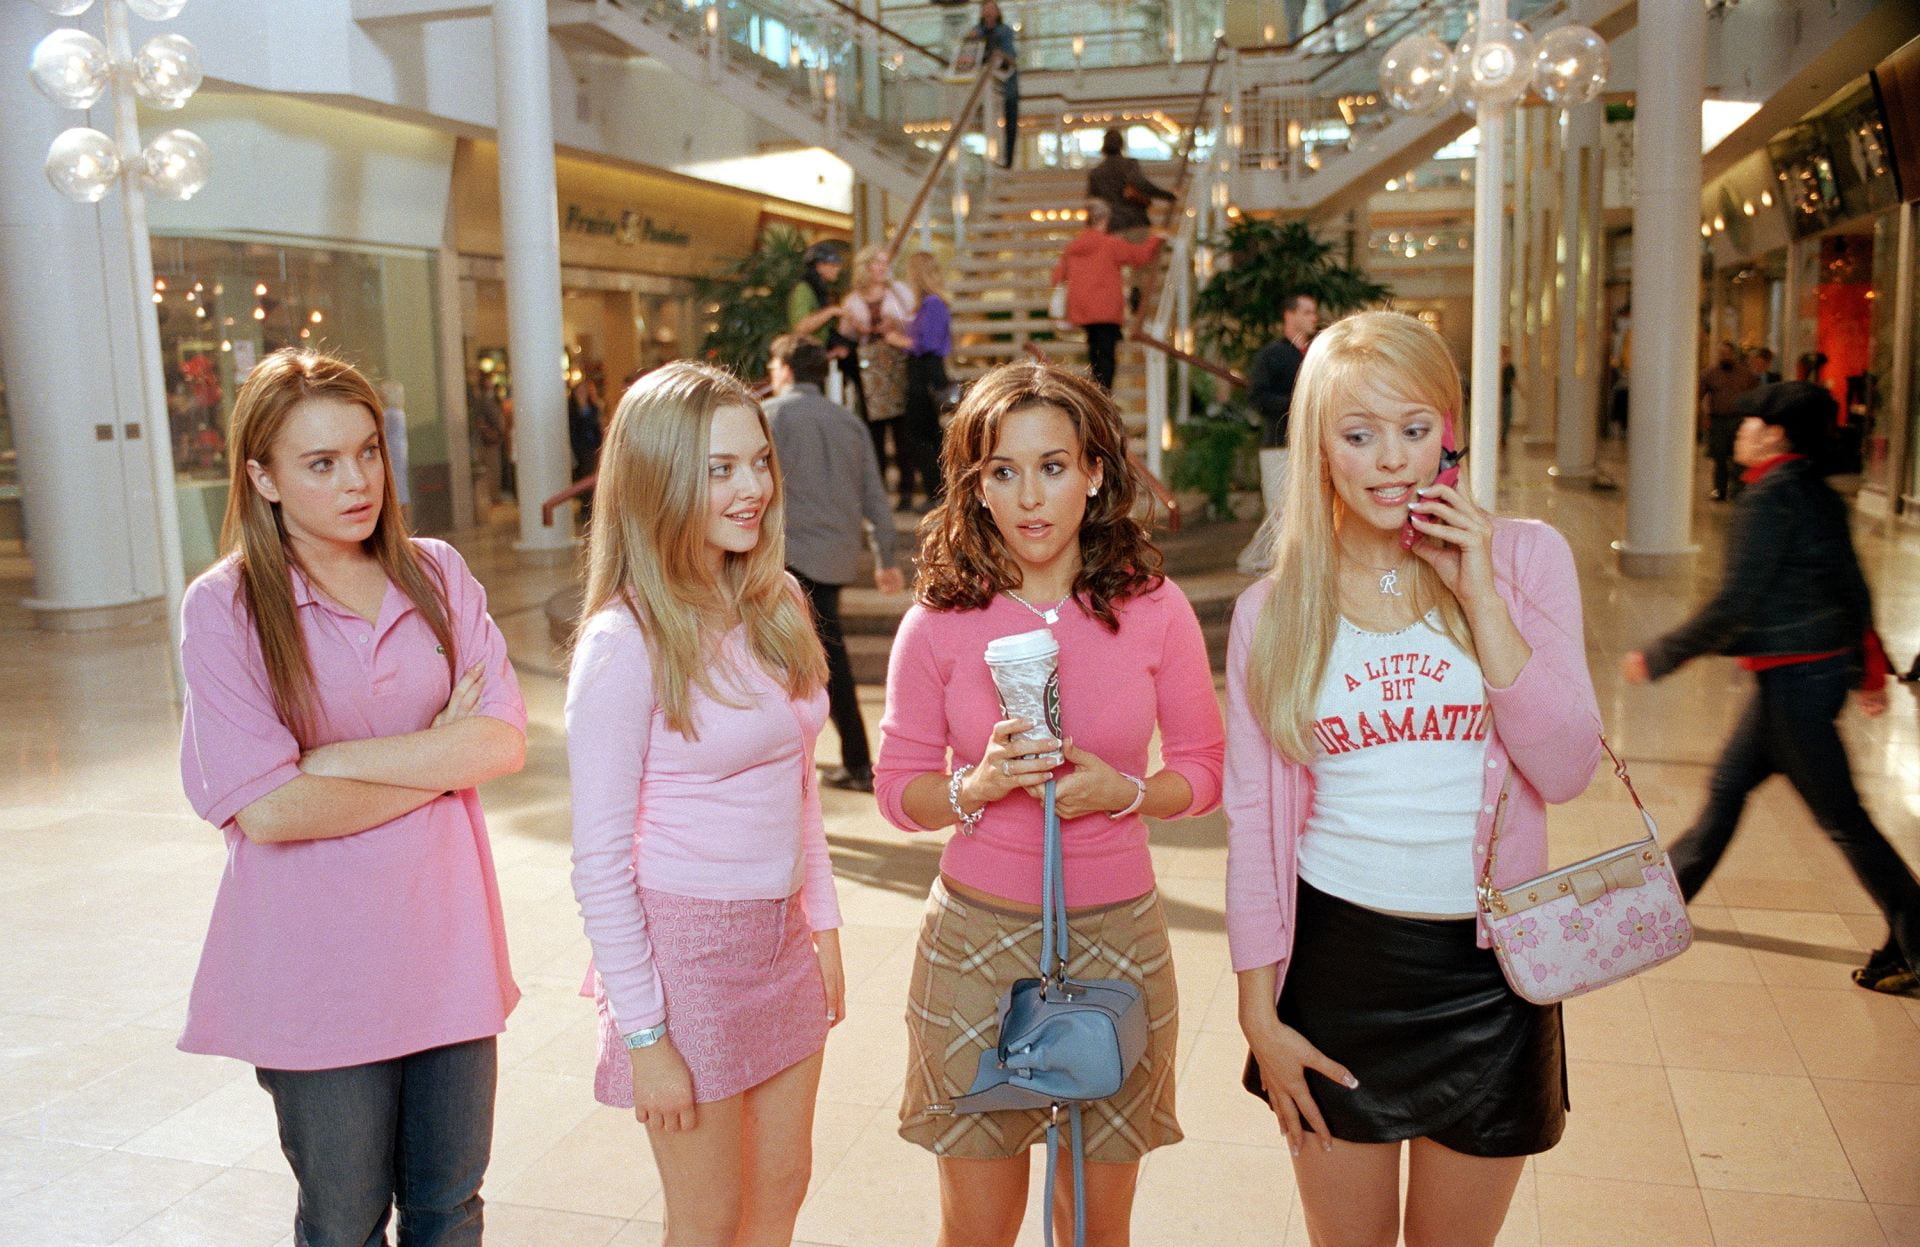 Lindsay Lohan, left, Amanda Seyfried, Lacey Chabert and Rachel McAdams in the 2004 movie “Mean Girls.” (Michael Gibson/Paramount Pictures/Zuma Press/TNS)